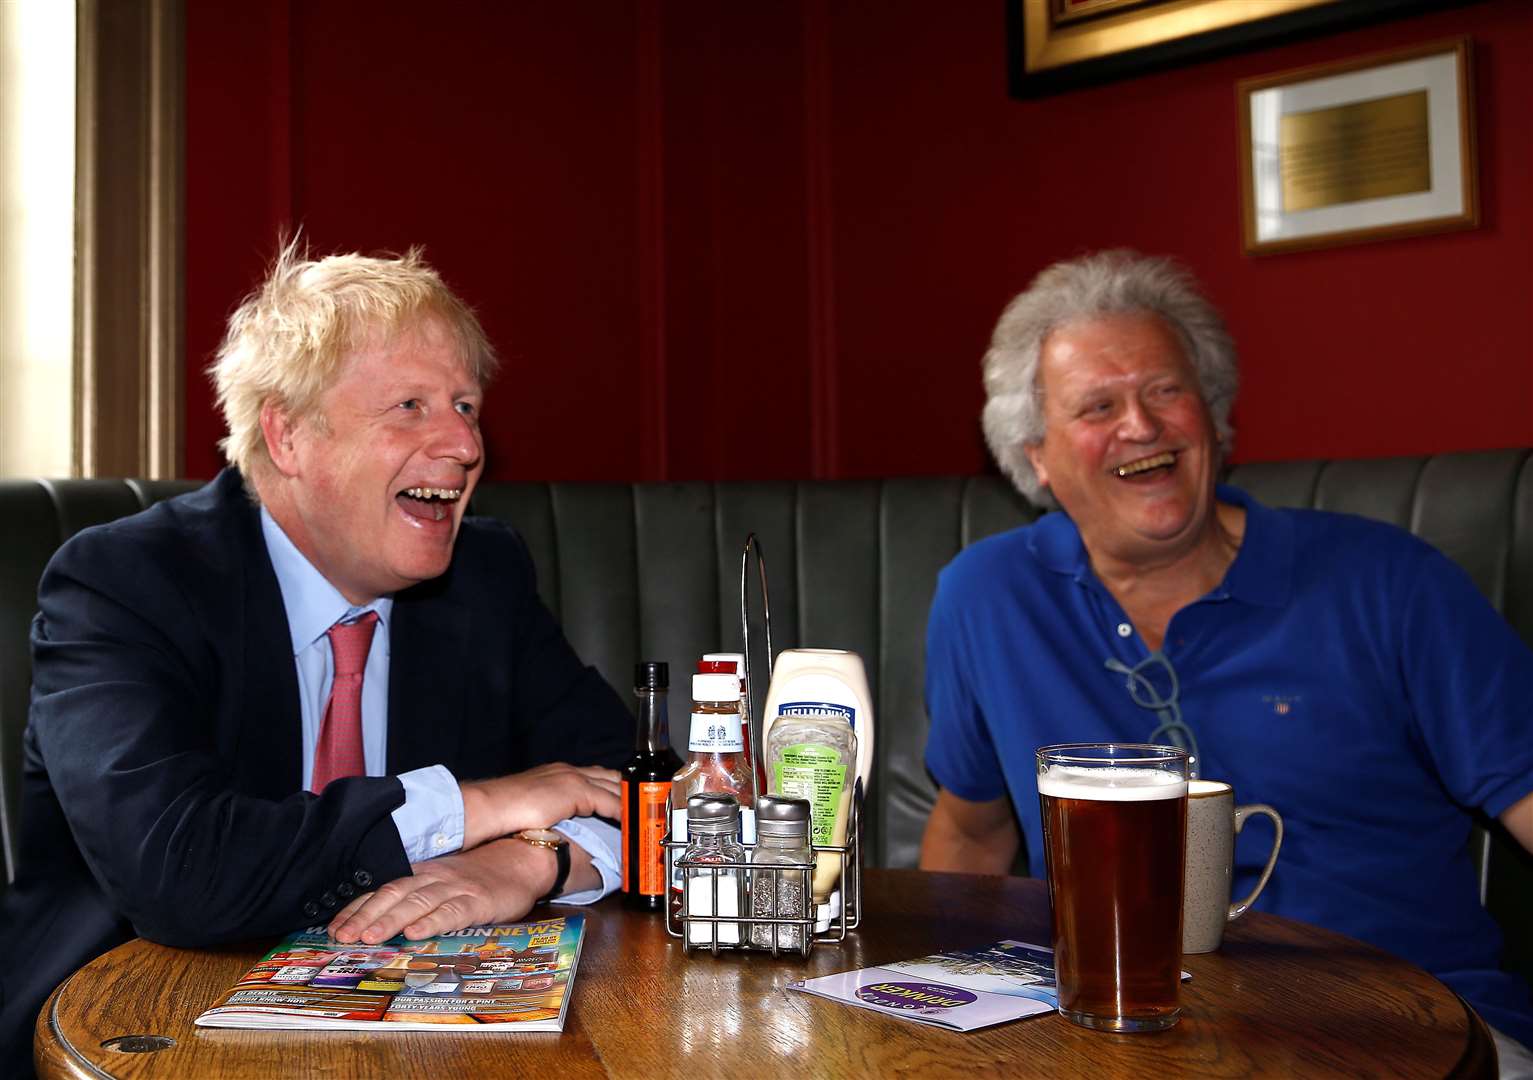 Wetherspoon founder Tim Martin called Boris Johnson a ‘winner’ when he ran in the Conservative leadership race (Henry Nicholls/PA)